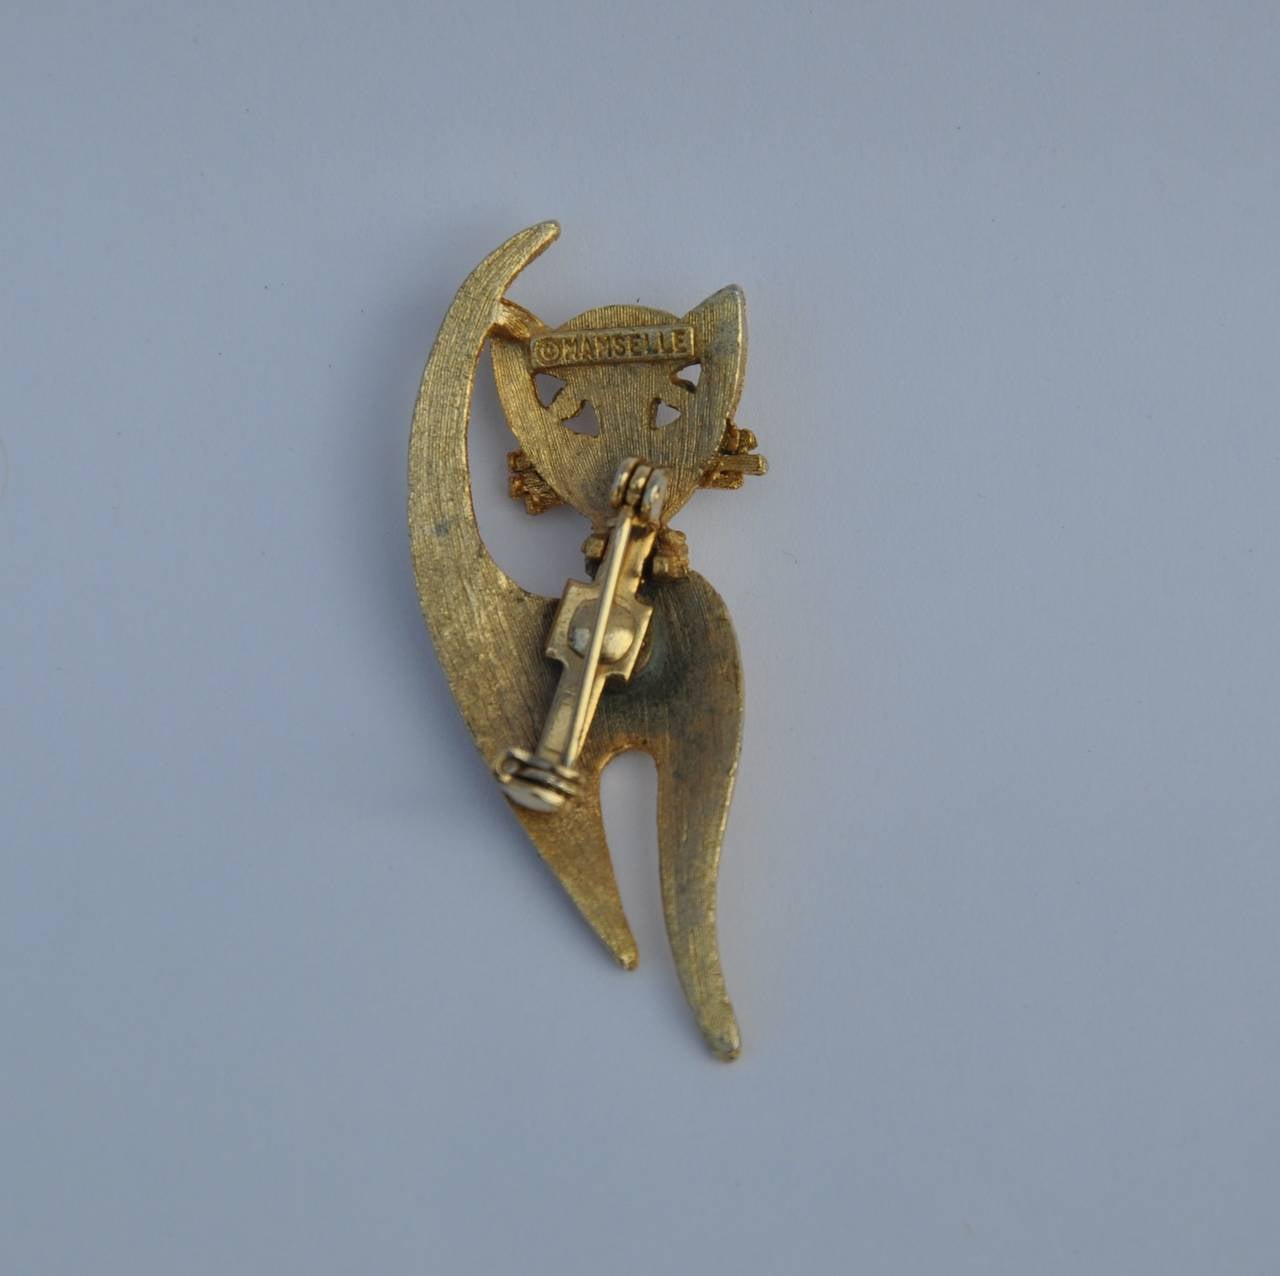 Mamselle "Kitty Cat" brooch measures 7/8" in length, 2" in height and 2/8" in depth. Wonderfully detailed, the brooch is signed on the backside.